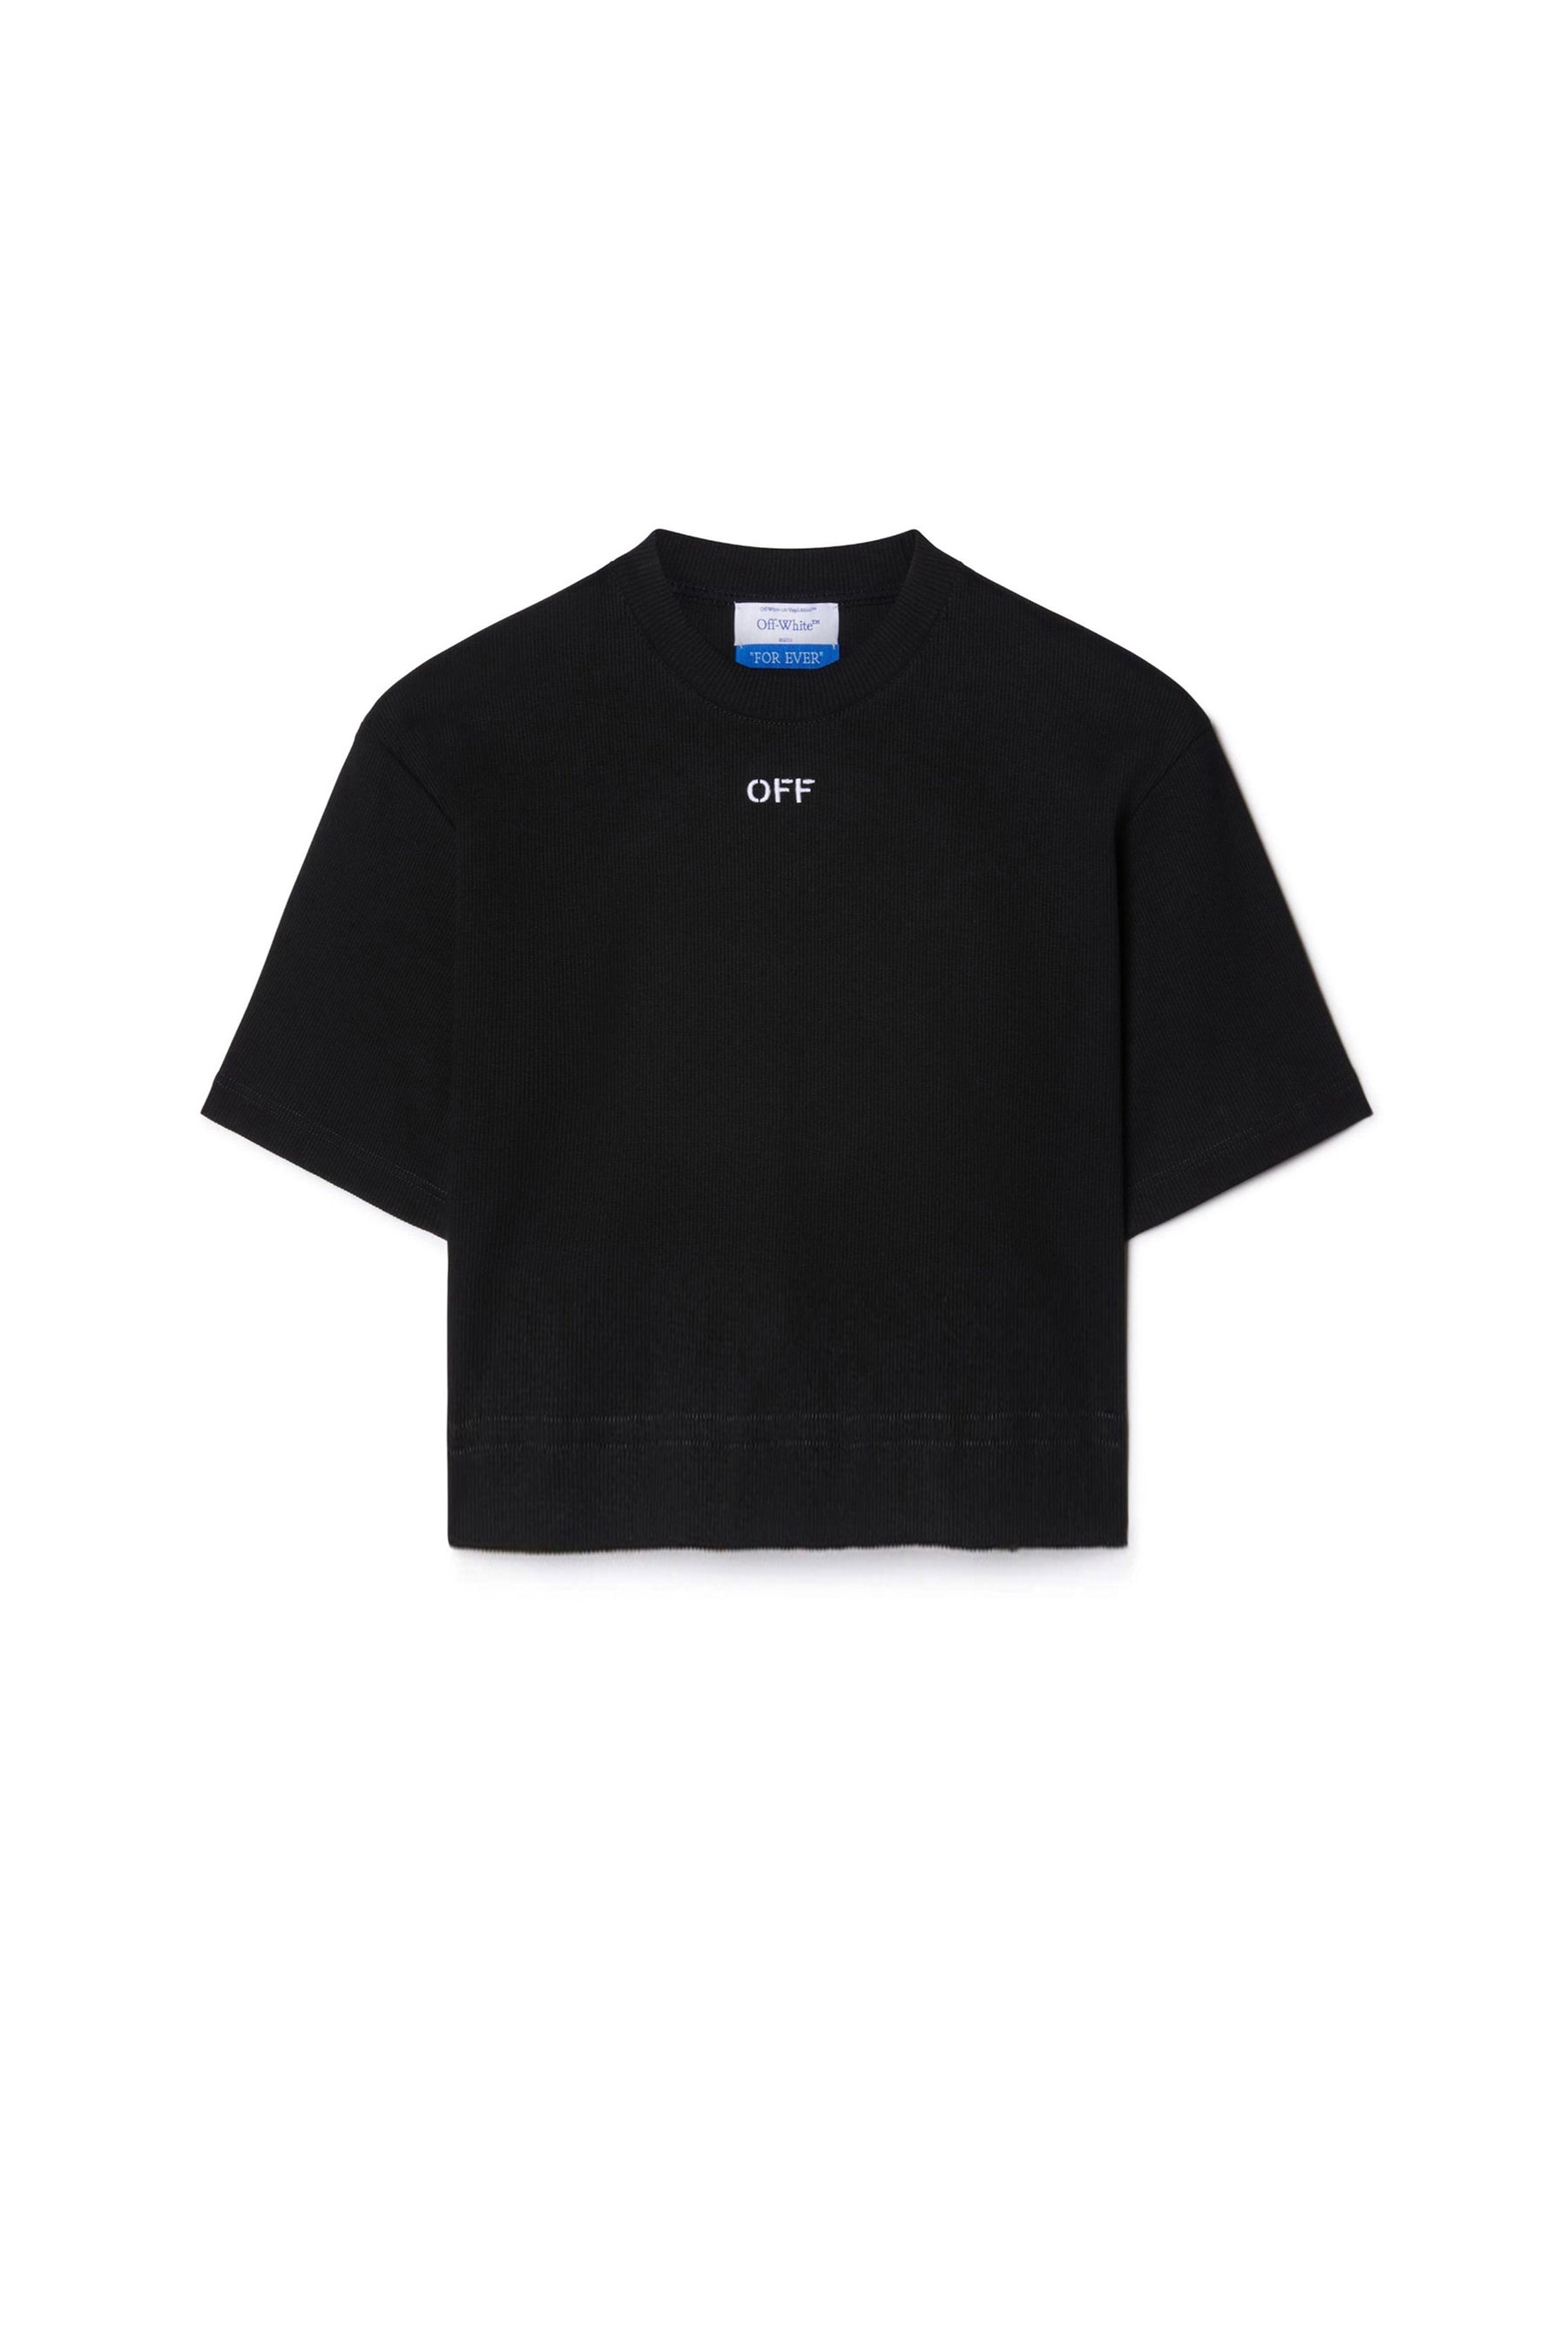 OFF STAMP RIB CROPPED TEE / BLK WHT - 1